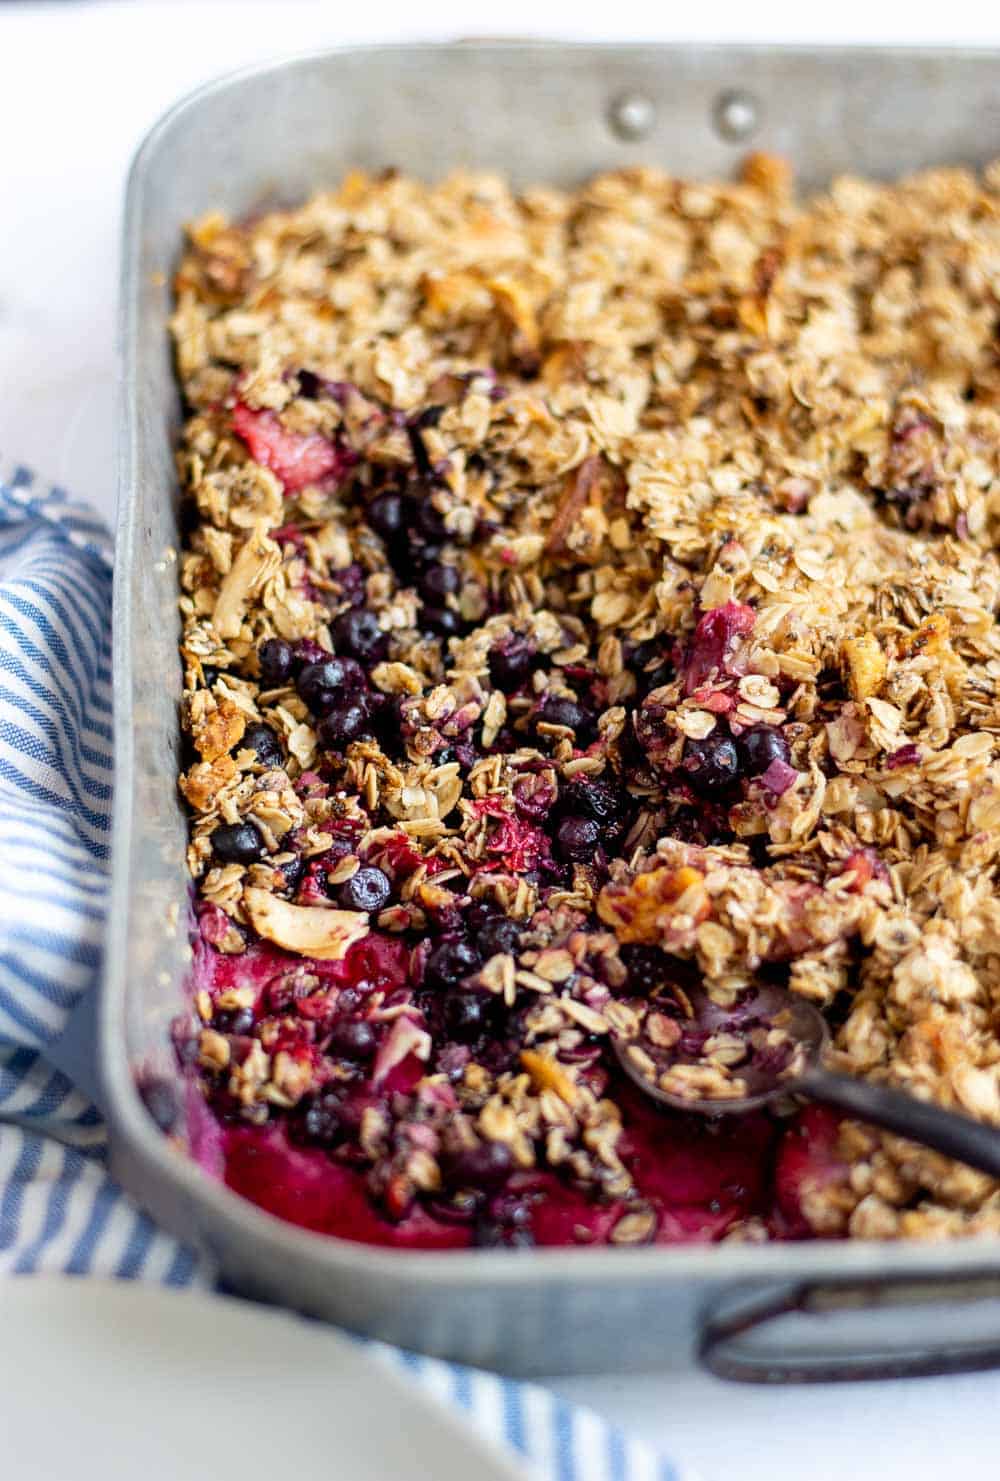 angled shot of finished berry crisp in metal baking pan